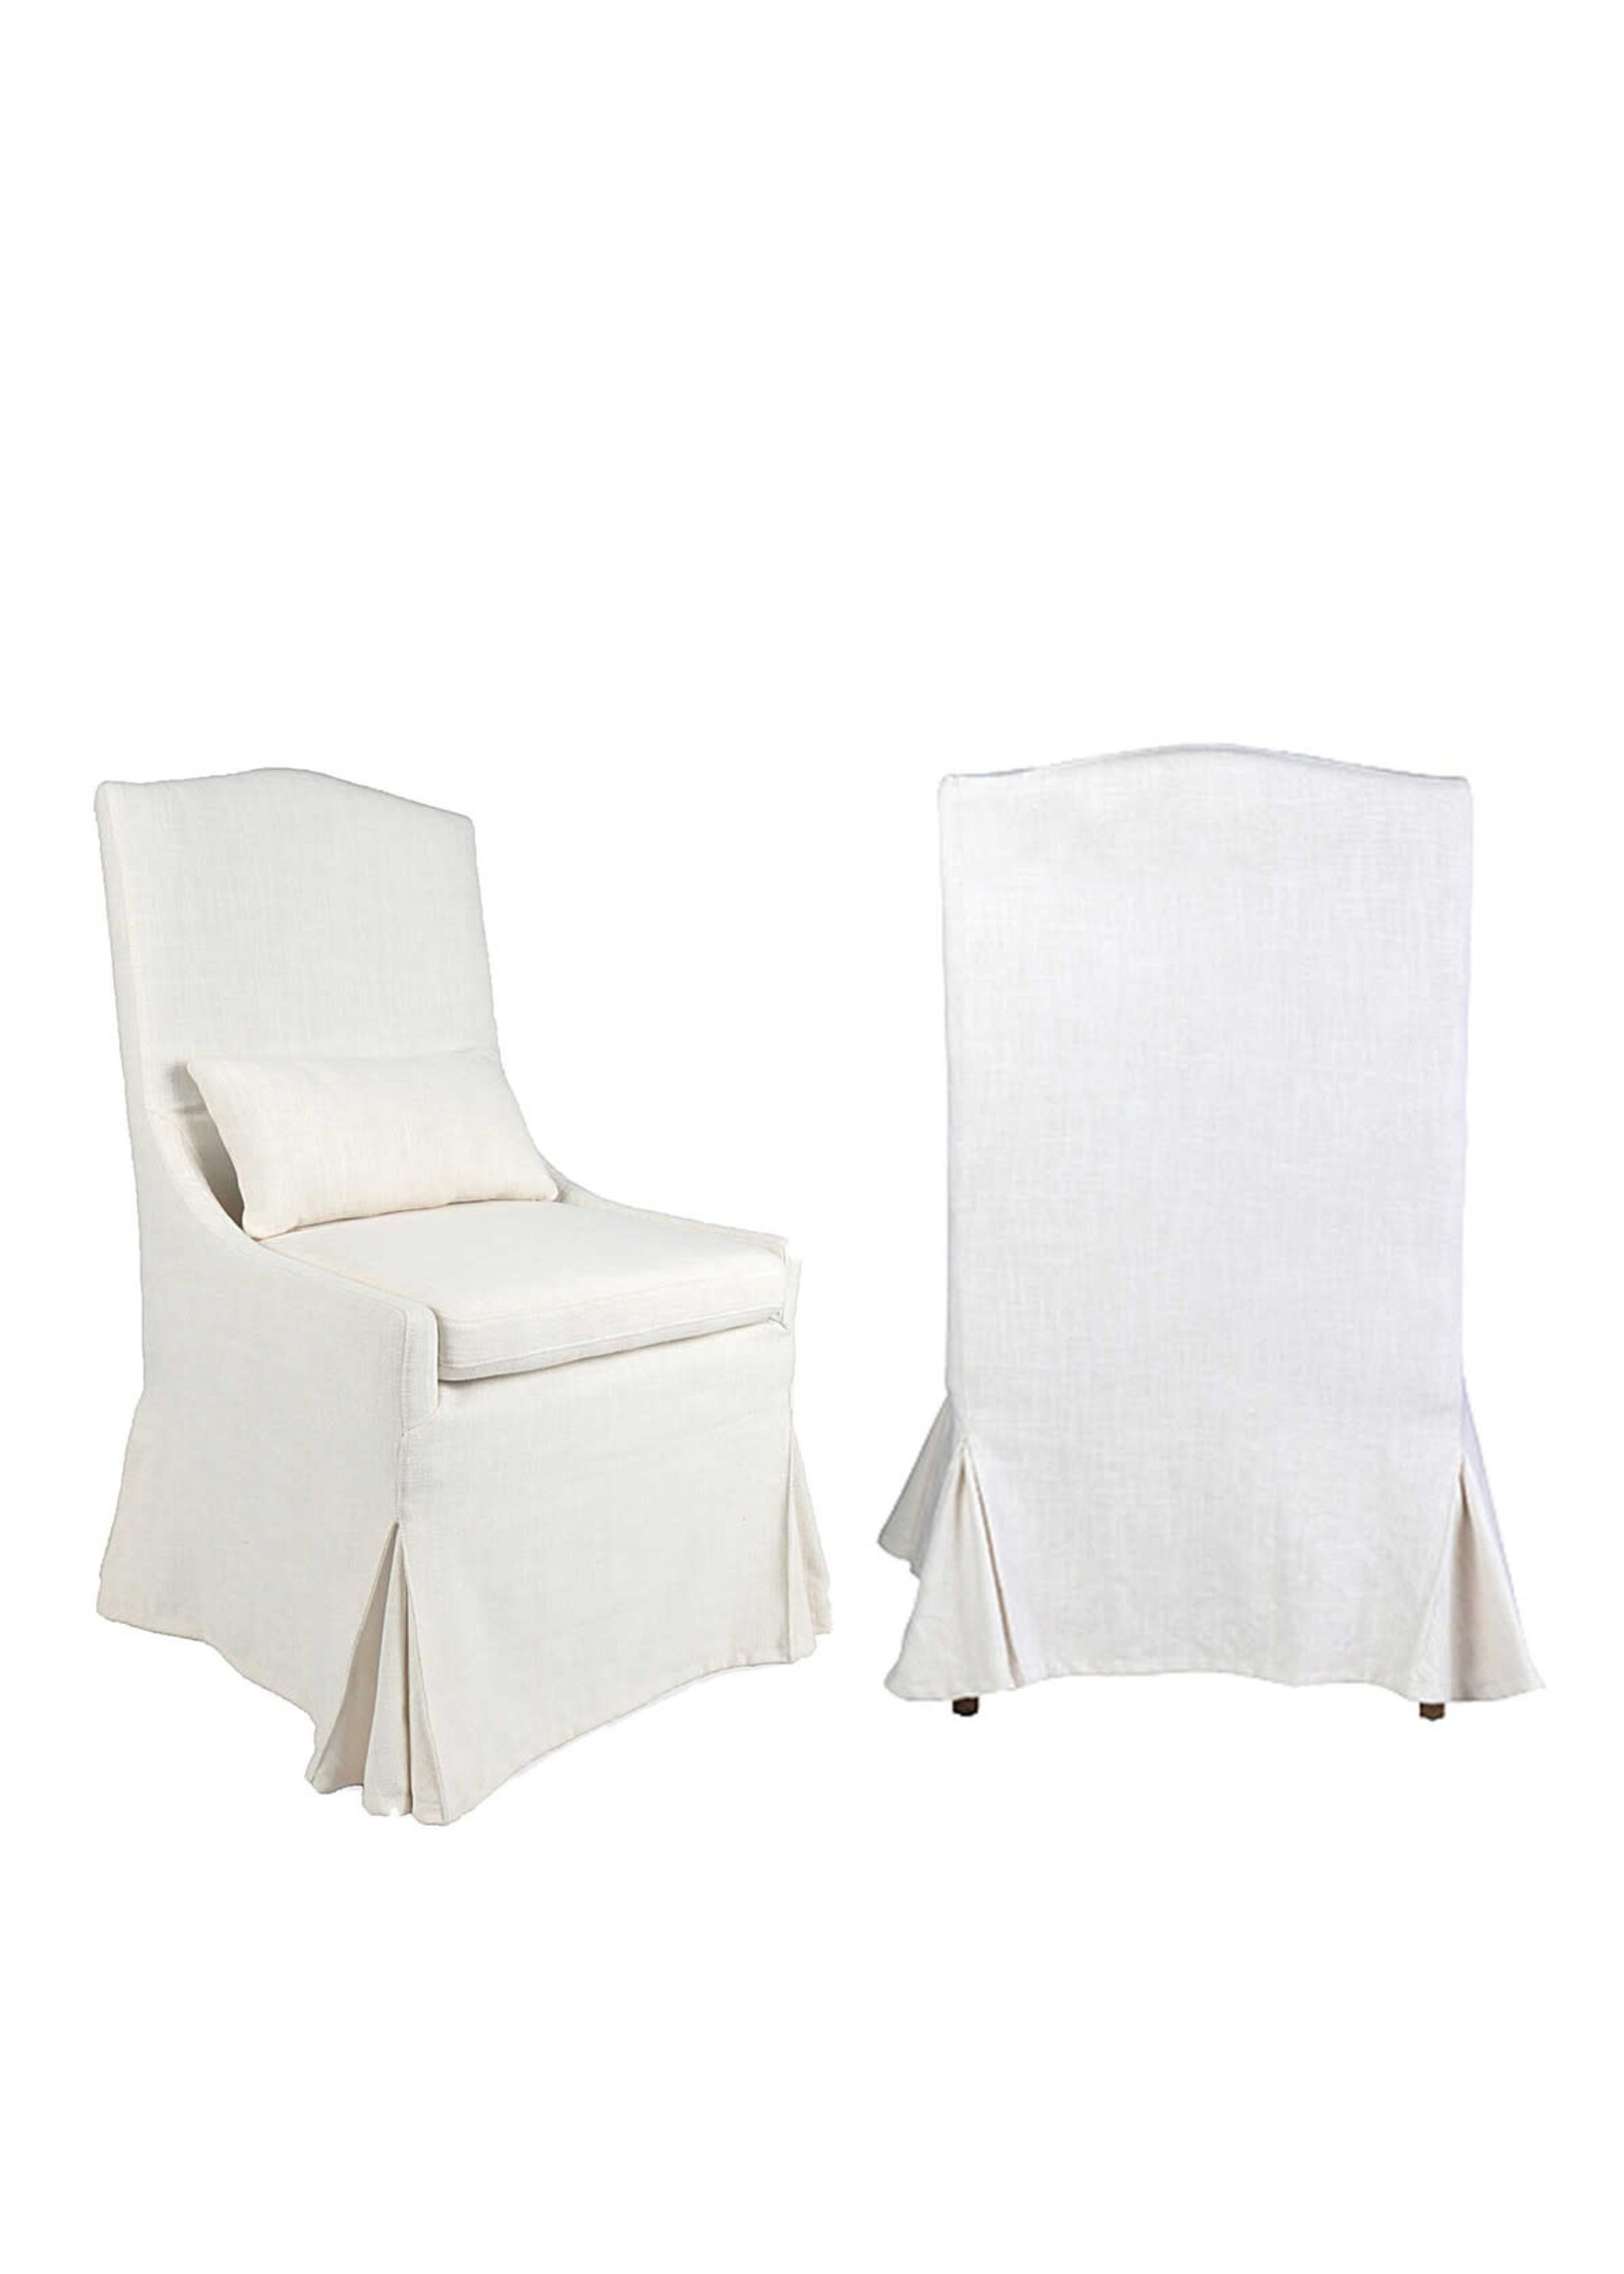 Jeffan Arabella Slipcovered Dining Chairs, Cream Linen, Set of 2 (Price is Per Pair)